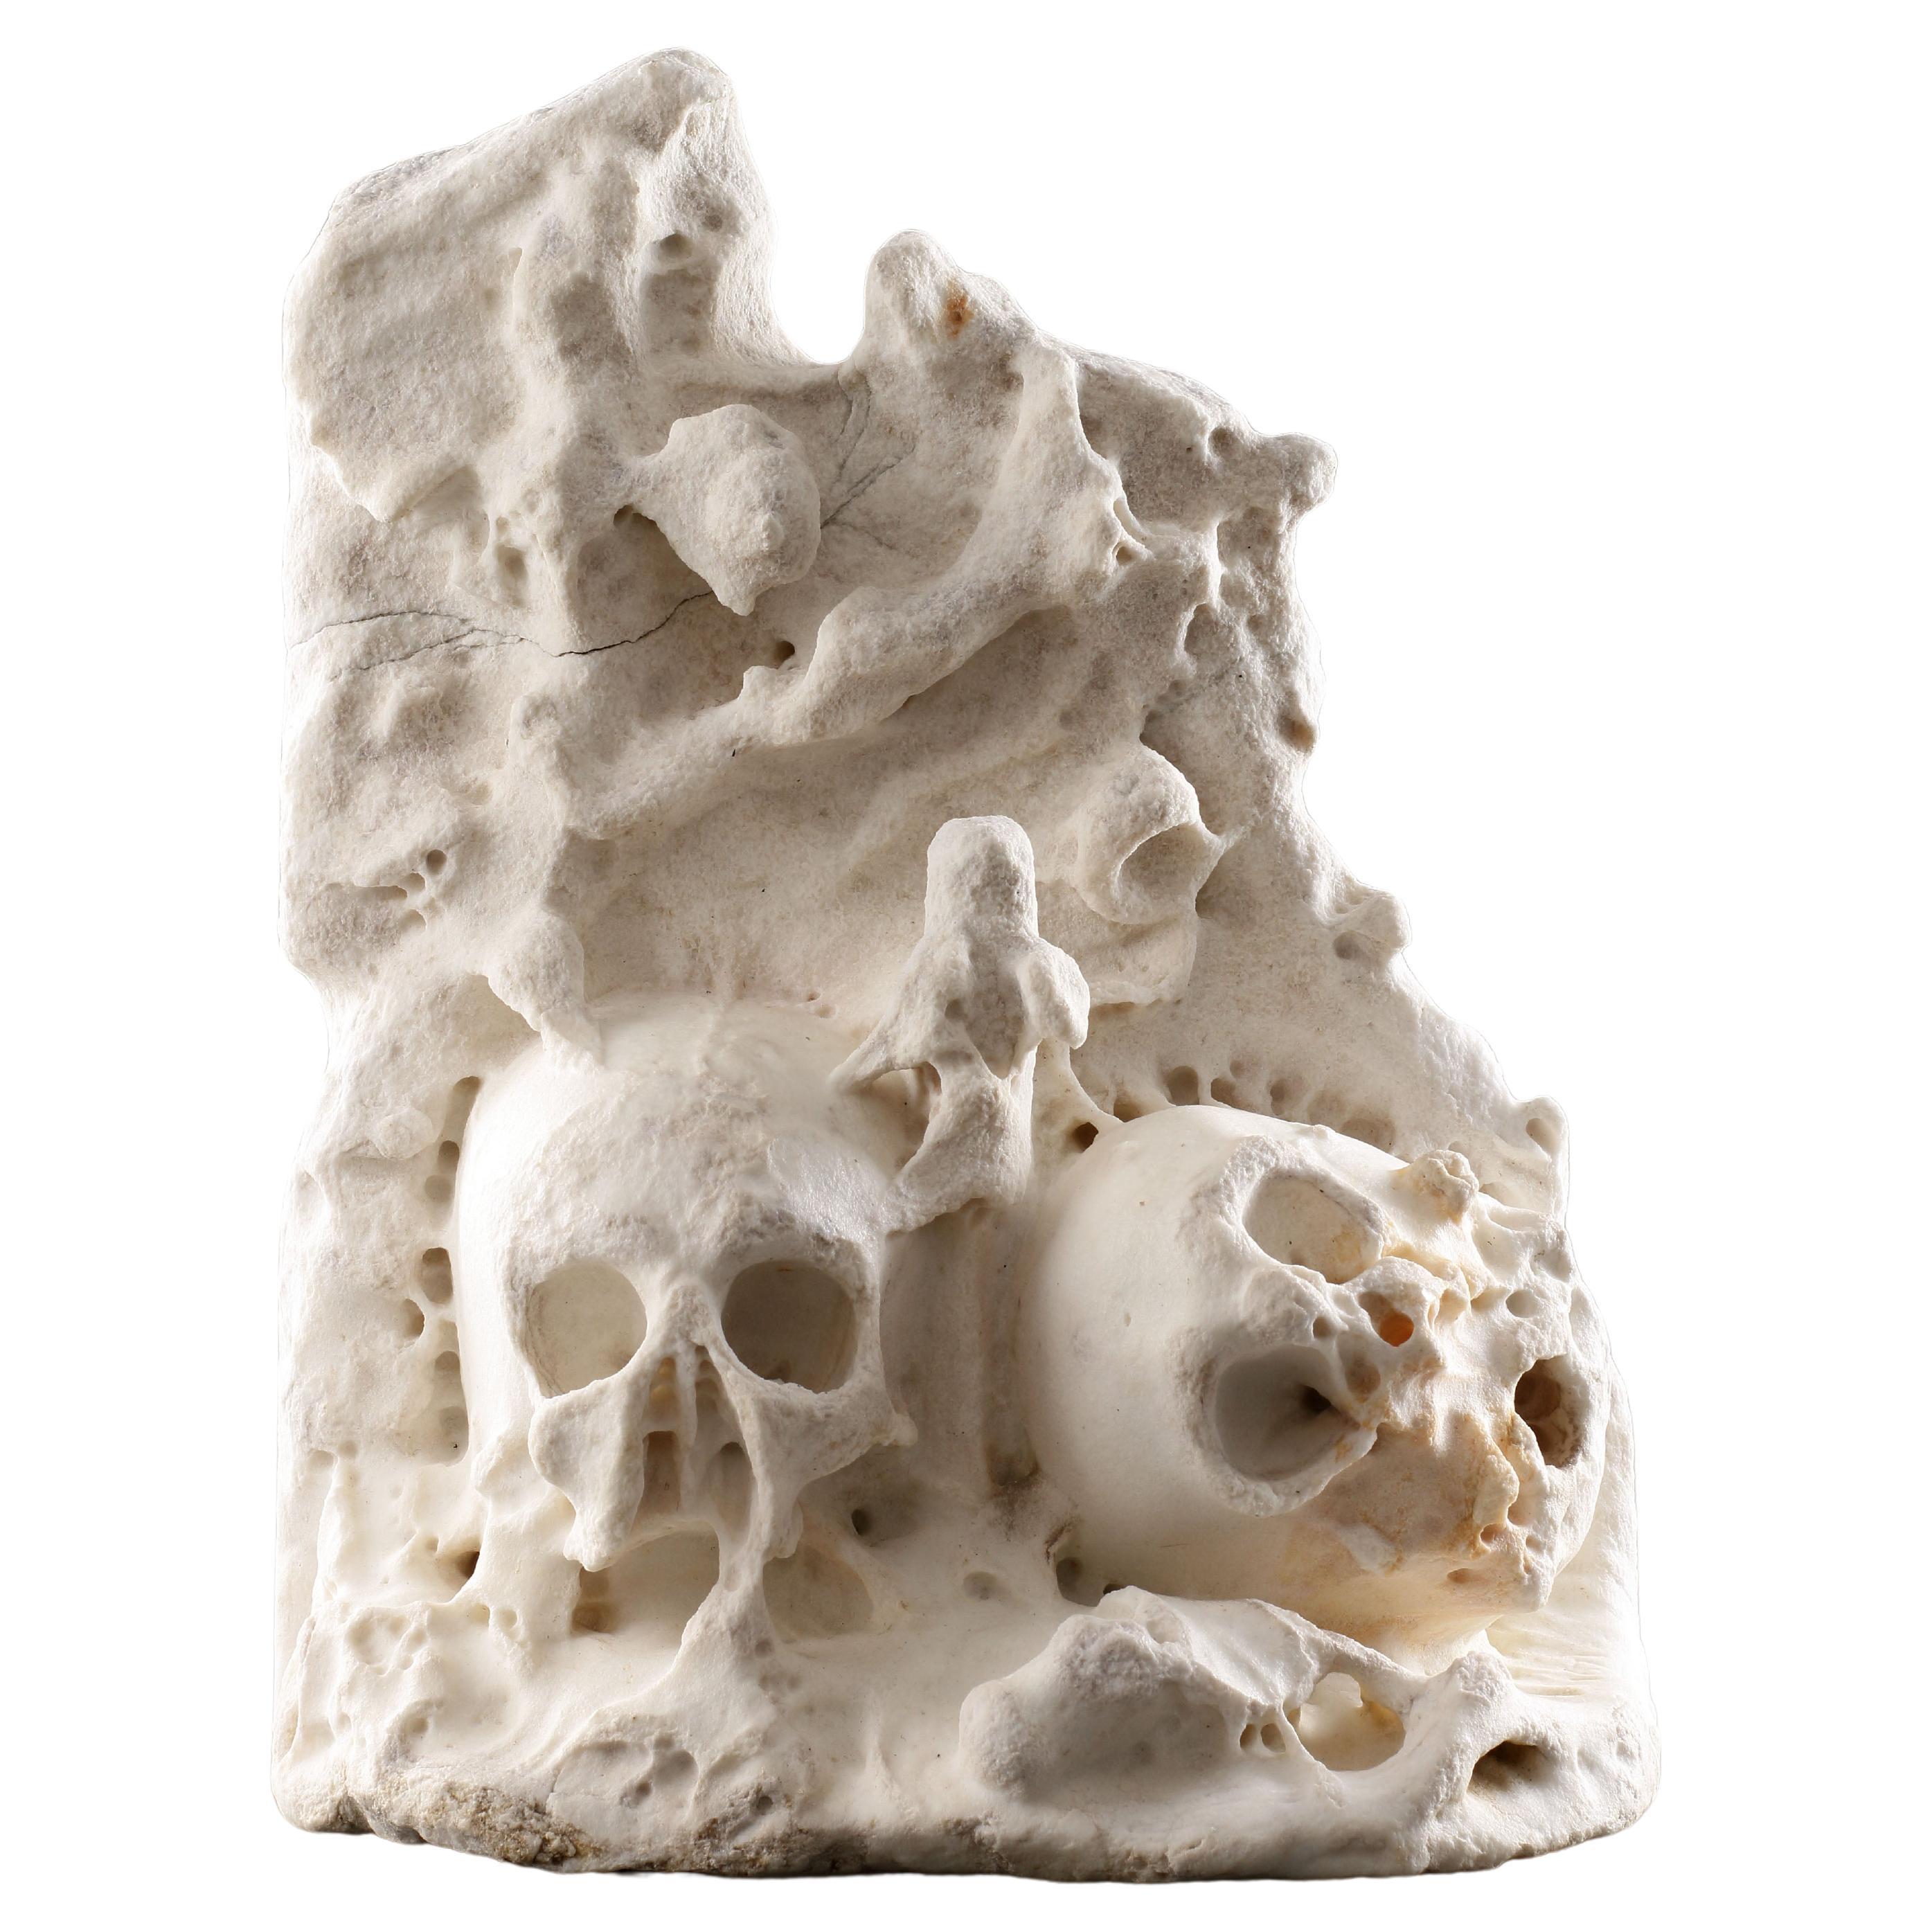 An Unusual and Rare English ‘Memento Mori’ Carved Shrine with Two Human Skulls For Sale